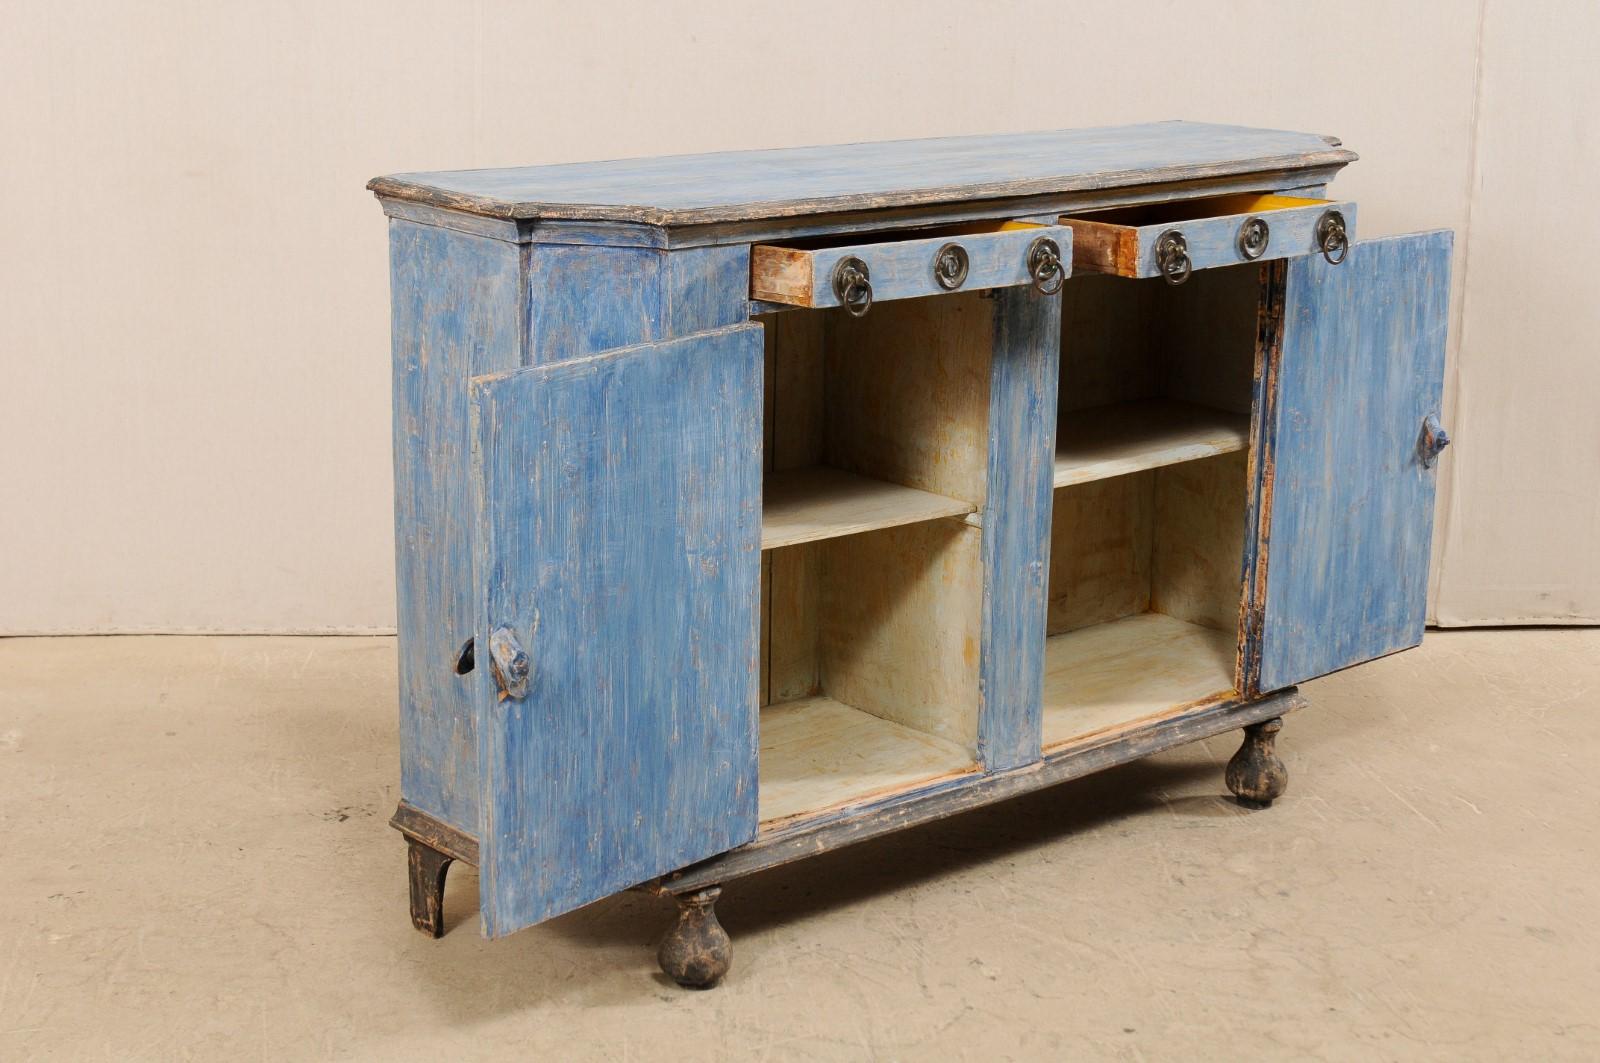 Hand-Painted French 19th Century Painted Wood Sideboard Cabinet in Blue with Charcoal Accents